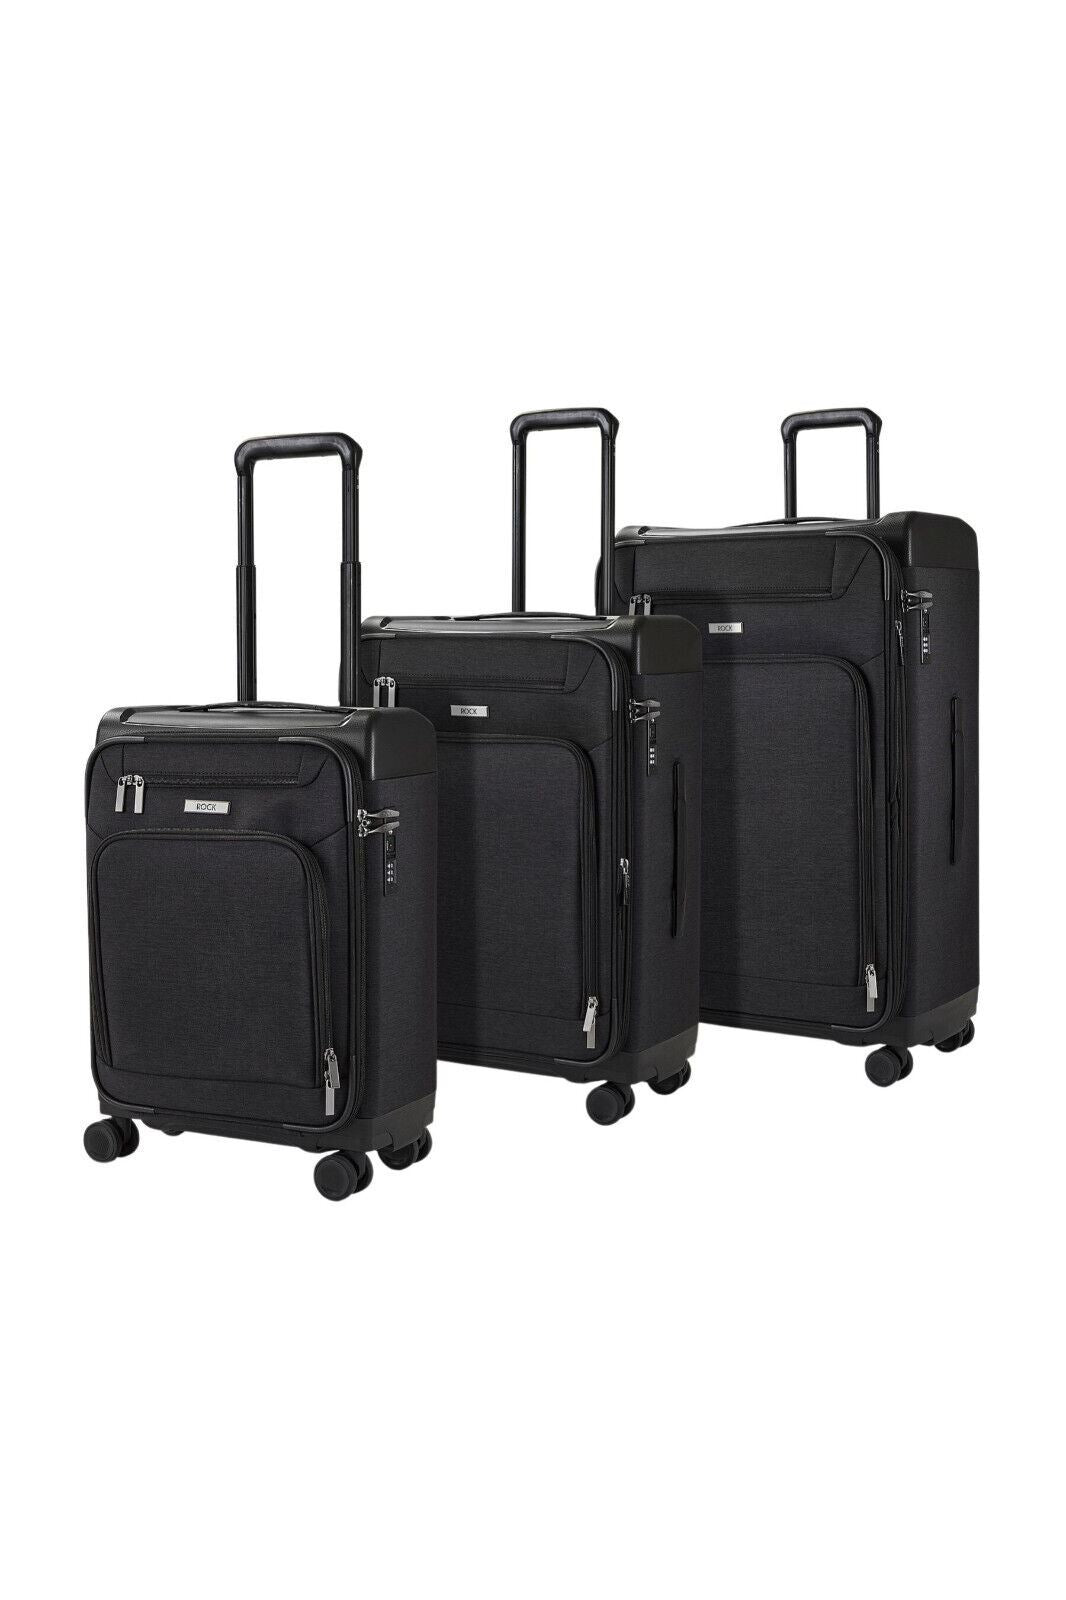 Lightweight Black Soft Suitcases 4 Wheel Luggage Travel Trolley Cases Cabin Bags - Upperclass Fashions 